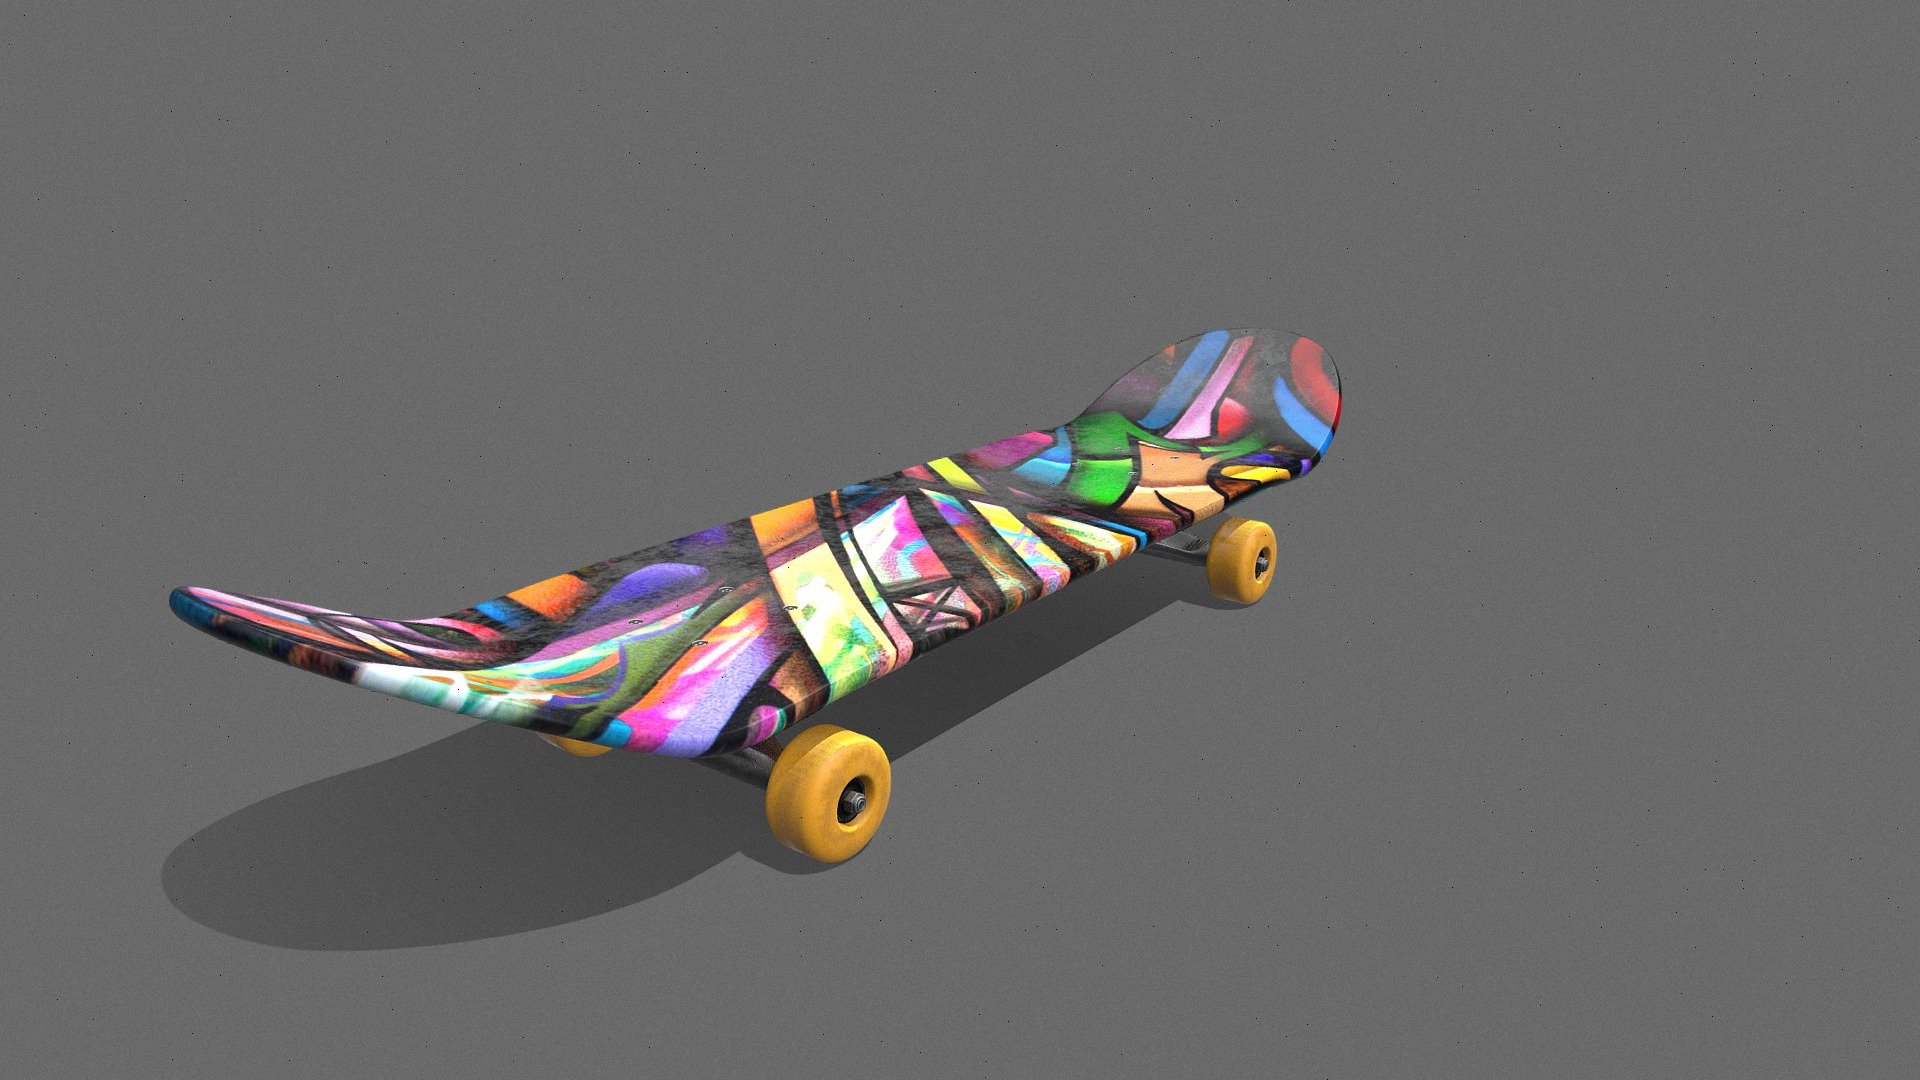 This high-quality 3D model represents a skateboard, the iconic and versatile recreational and transportation device loved by riders of all ages. The model faithfully captures the physical design and features of a standard skateboard.

The skateboard deck is depicted with precision, showcasing its characteristic elongated shape, concave profile, and layered construction. The model highlights the top of the deck, often adorned with grip tape for better traction, and the underside, 

The skateboard's trucks, wheels, and bearings are accurately represented, showcasing the hardware responsible for steering and maintaining smooth movement

Whether you need it for sports equipment showcases, urban visualizations, or any other creative project, this 3D model of a skateboard will help you accurately visualize and showcase this classic piece of recreational gear in a virtual environment.

Feel free to use this description when uploading your skateboard 3D model to Sketchfab or any other platform 3d model